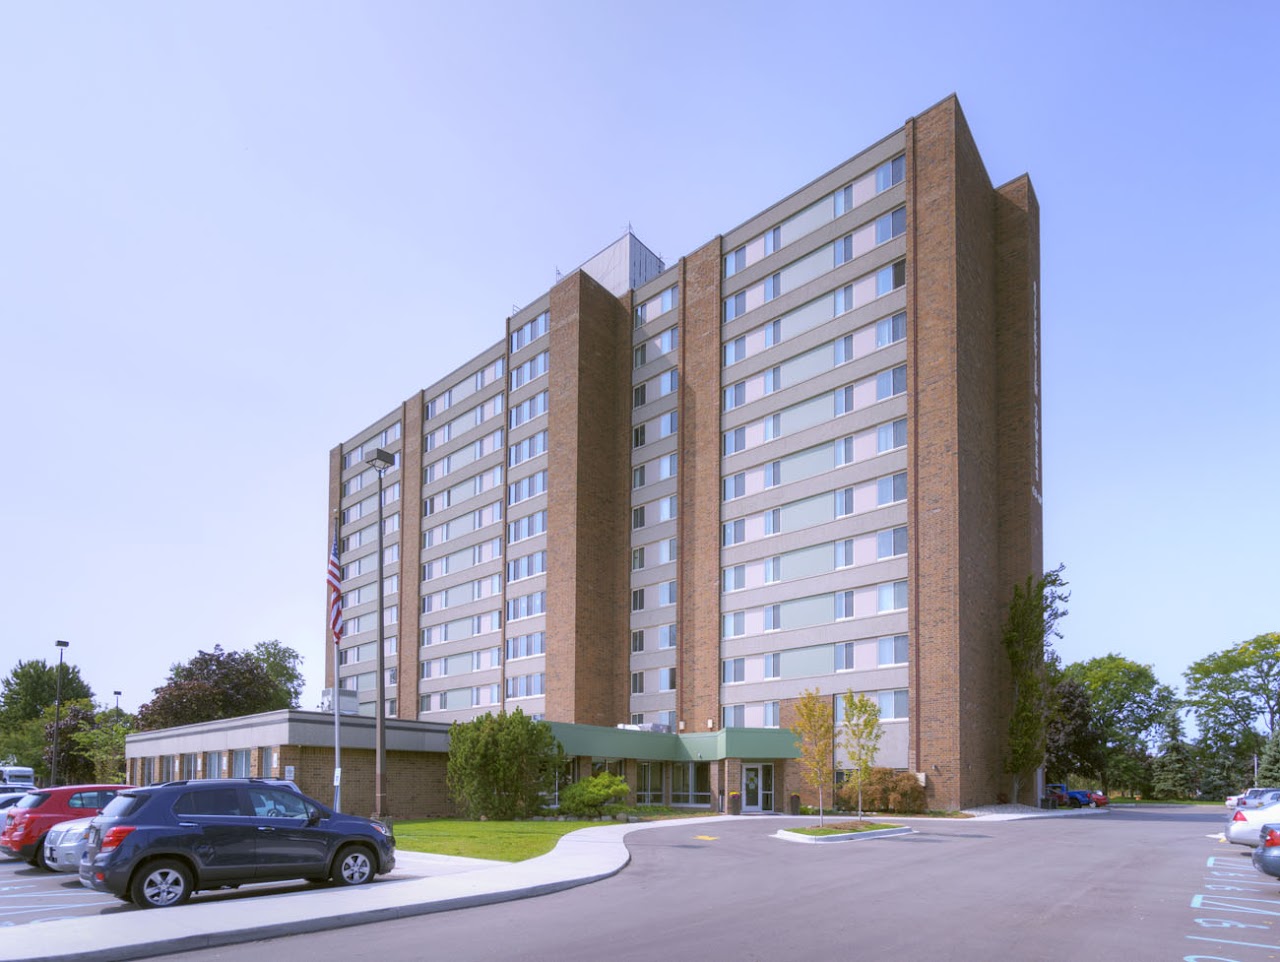 Photo of RIVERVIEW TOWER (RIVERVIEW). Affordable housing located at 13333 PENNSYLVANIA AVE RIVERVIEW, MI 48192